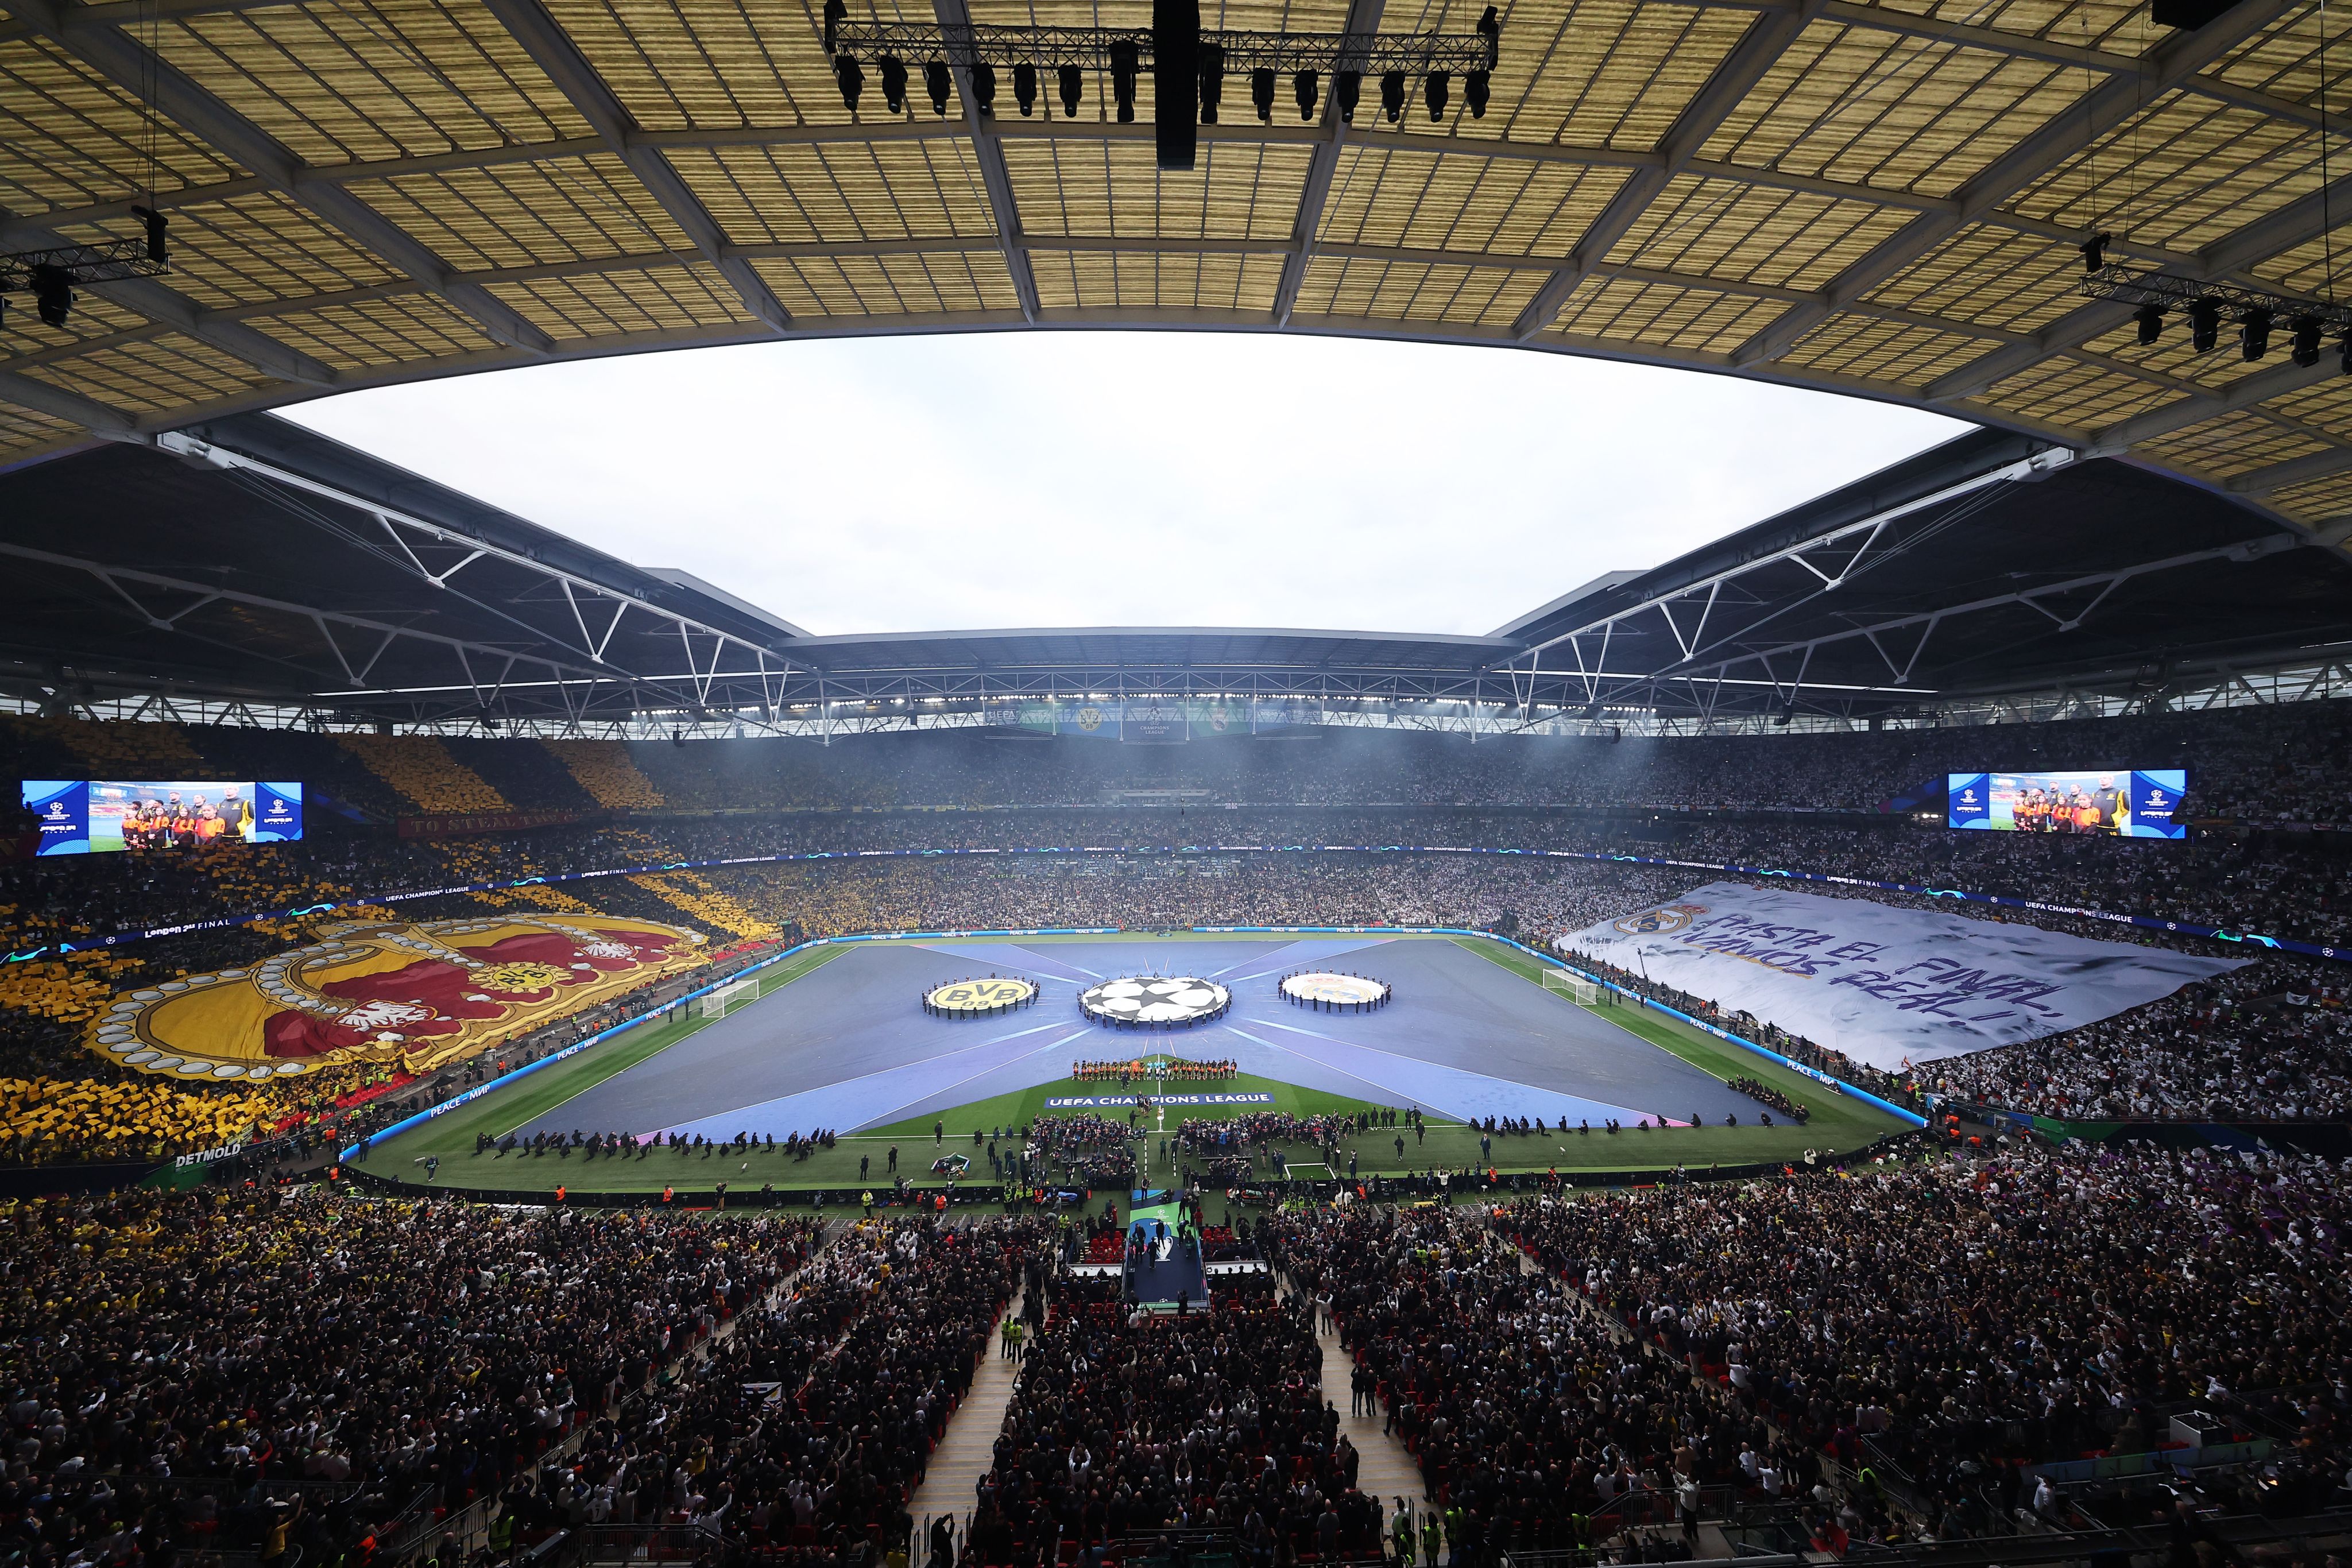 A photo taken during the opening ceremony of the UEFA Champions League Final